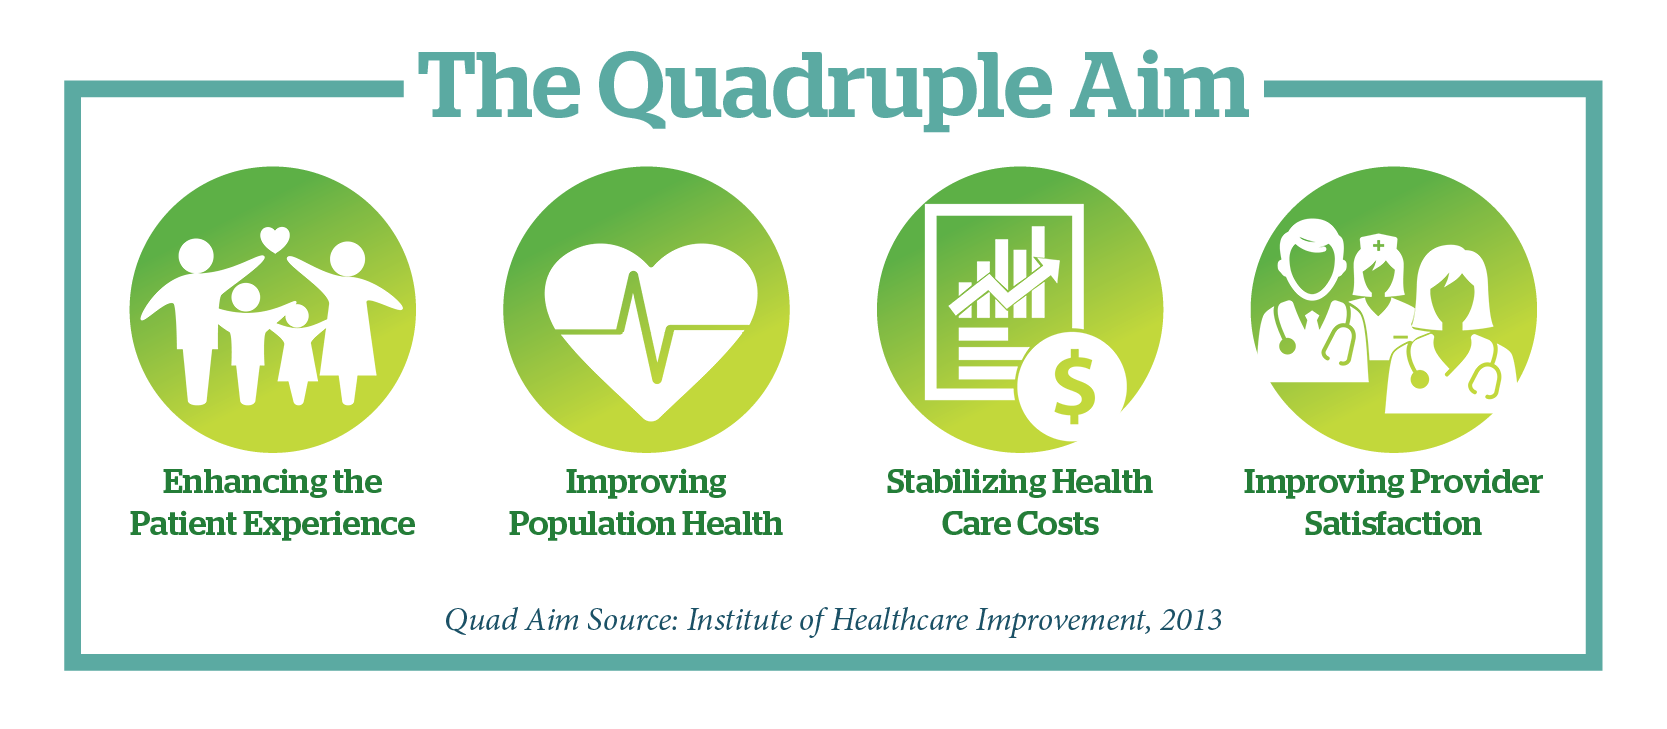 The quadruple aim is respresented in this illustration - Enhancing the Patient Experience (icon of a family with a heart floating above them), stabilizing health care costs (icon of a dollar sign and an arrow going up), improving population health (an icon of a healthy heartbeat), and improving provider satisfaction (an icon of health care providers wearing medical clothing and stethoscopes)